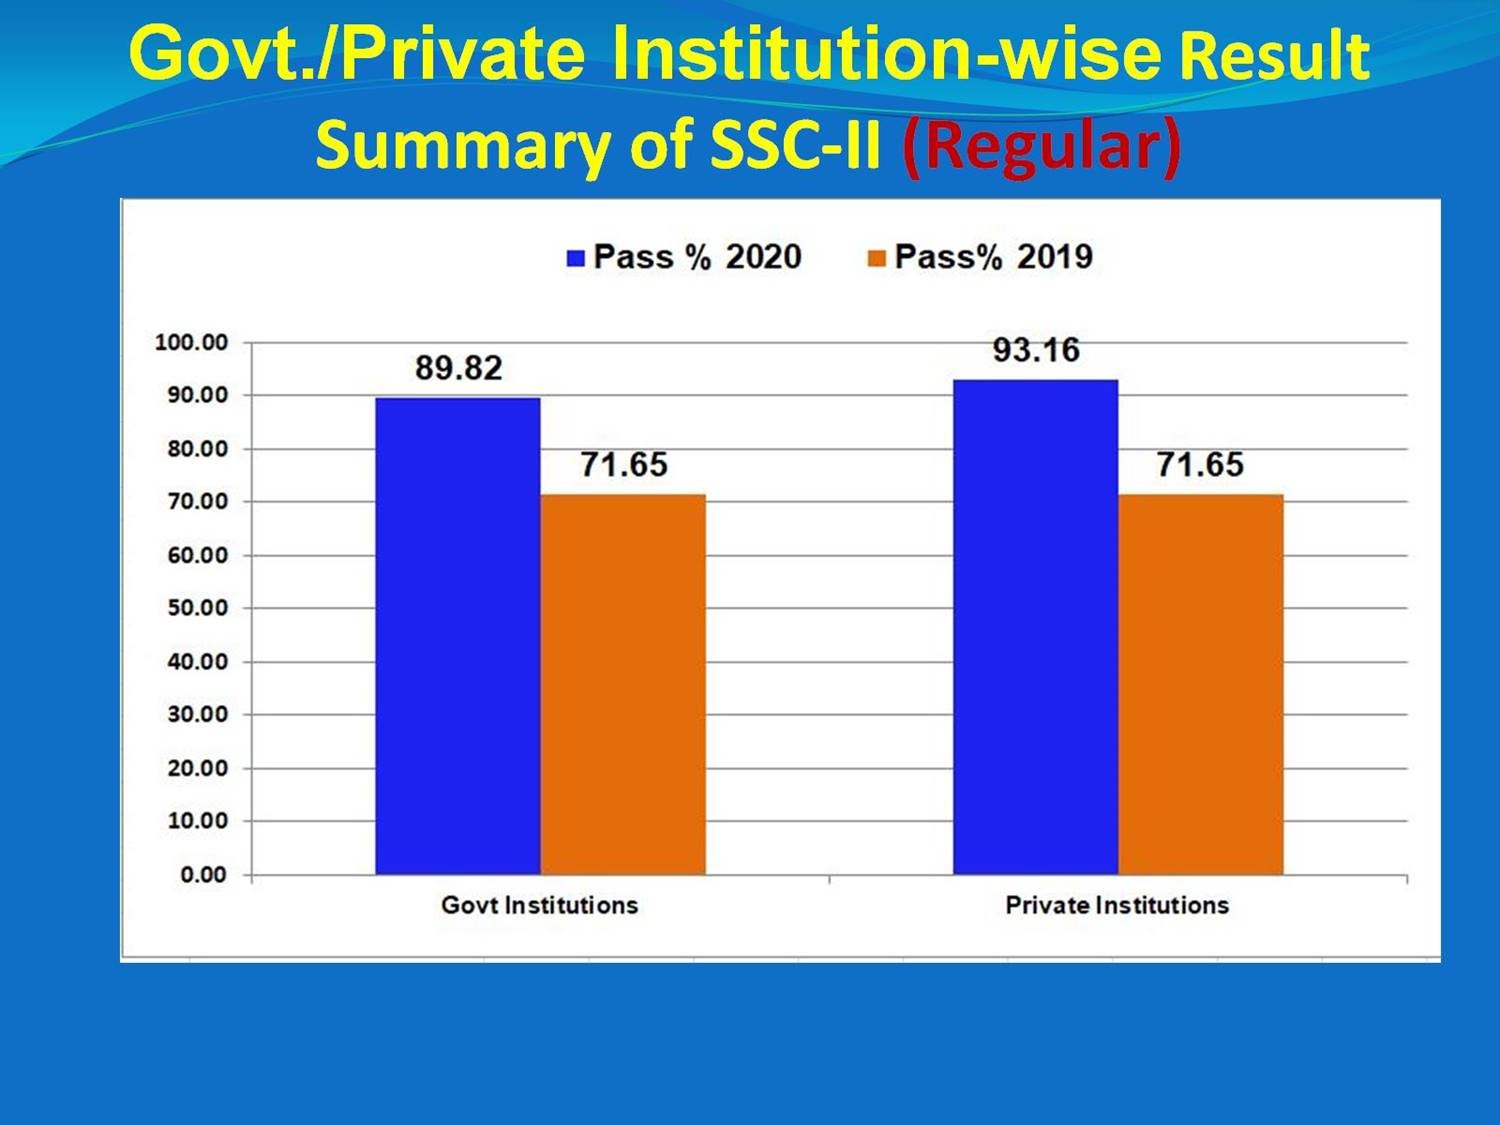 Govt./Private Institution Wise Result Summary of SSC-II